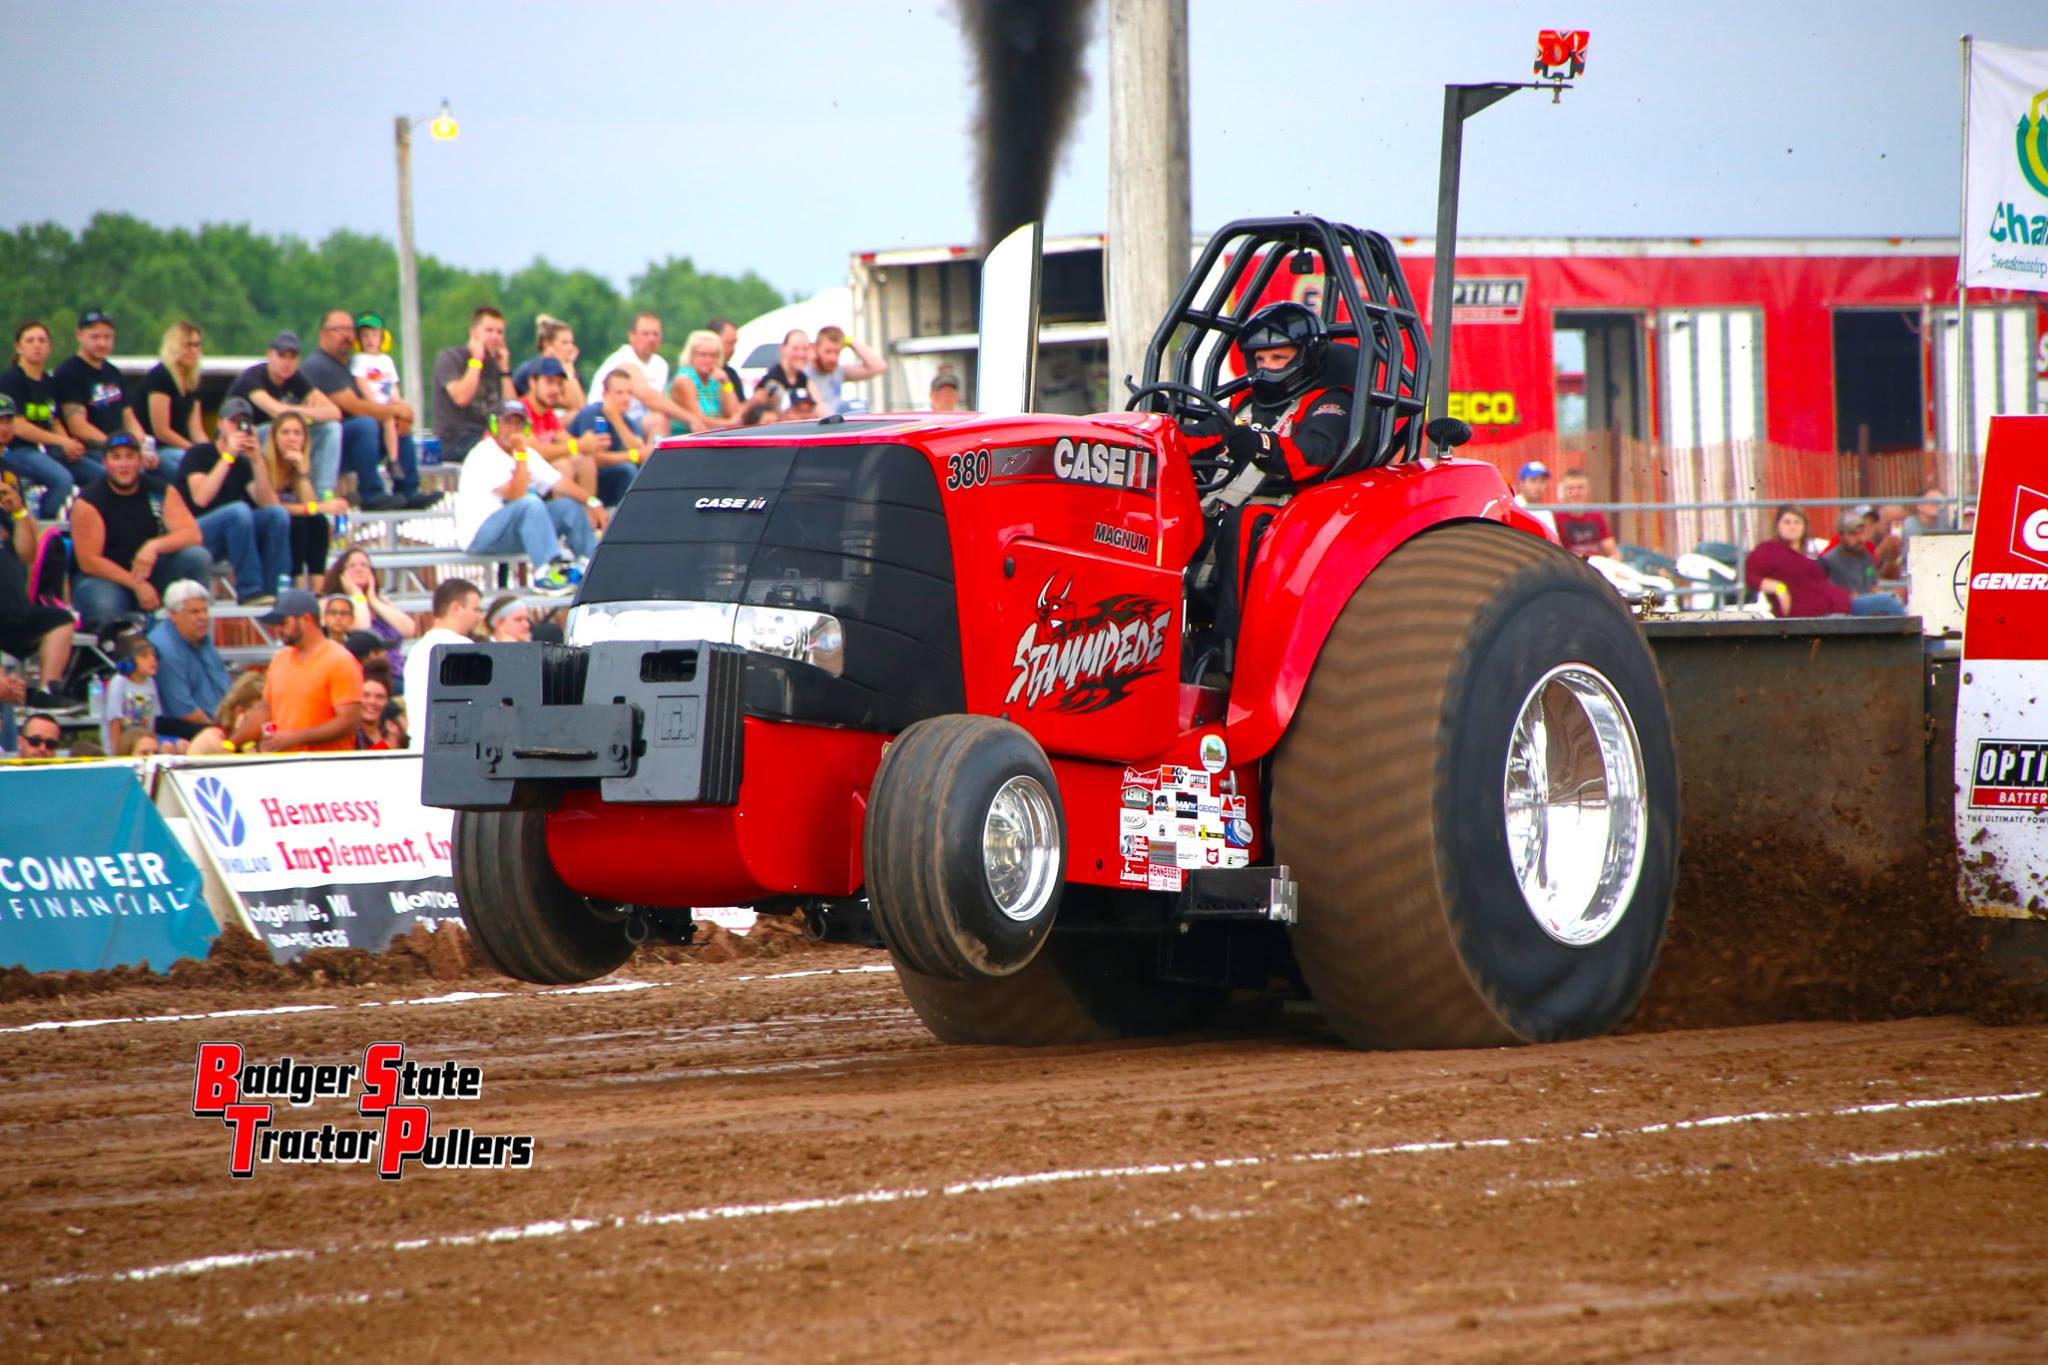 Badger state tractor pull